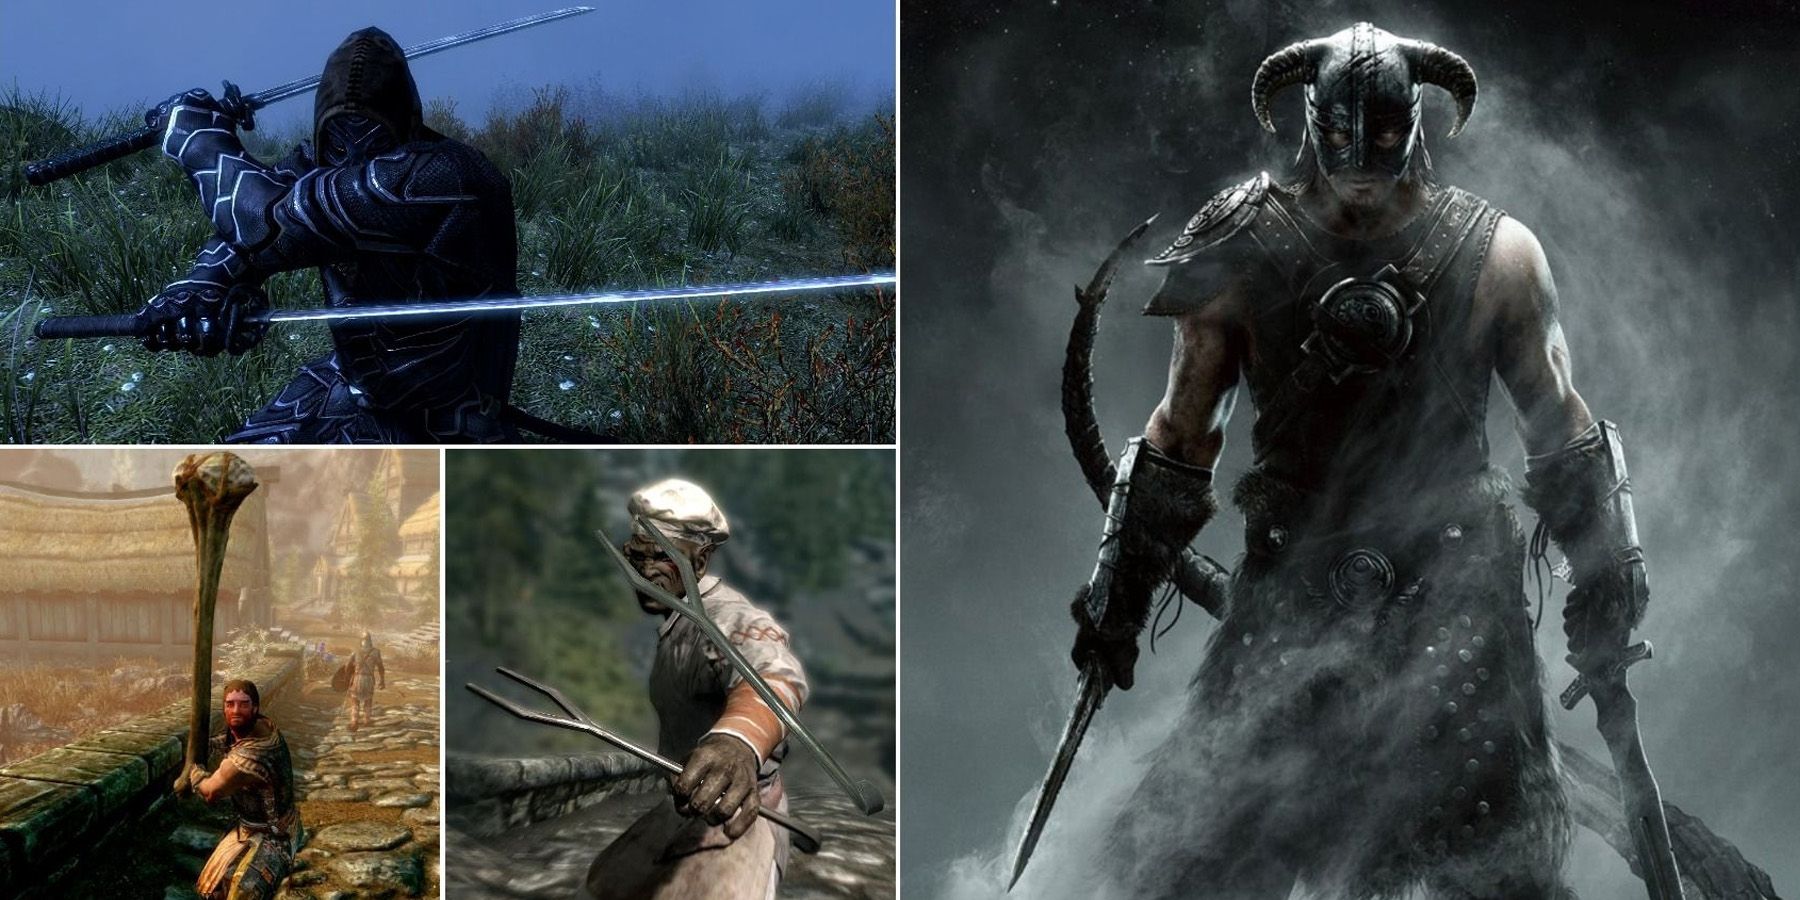 Skyrim: The 18 Most Exceedingly Rare Items In The Game